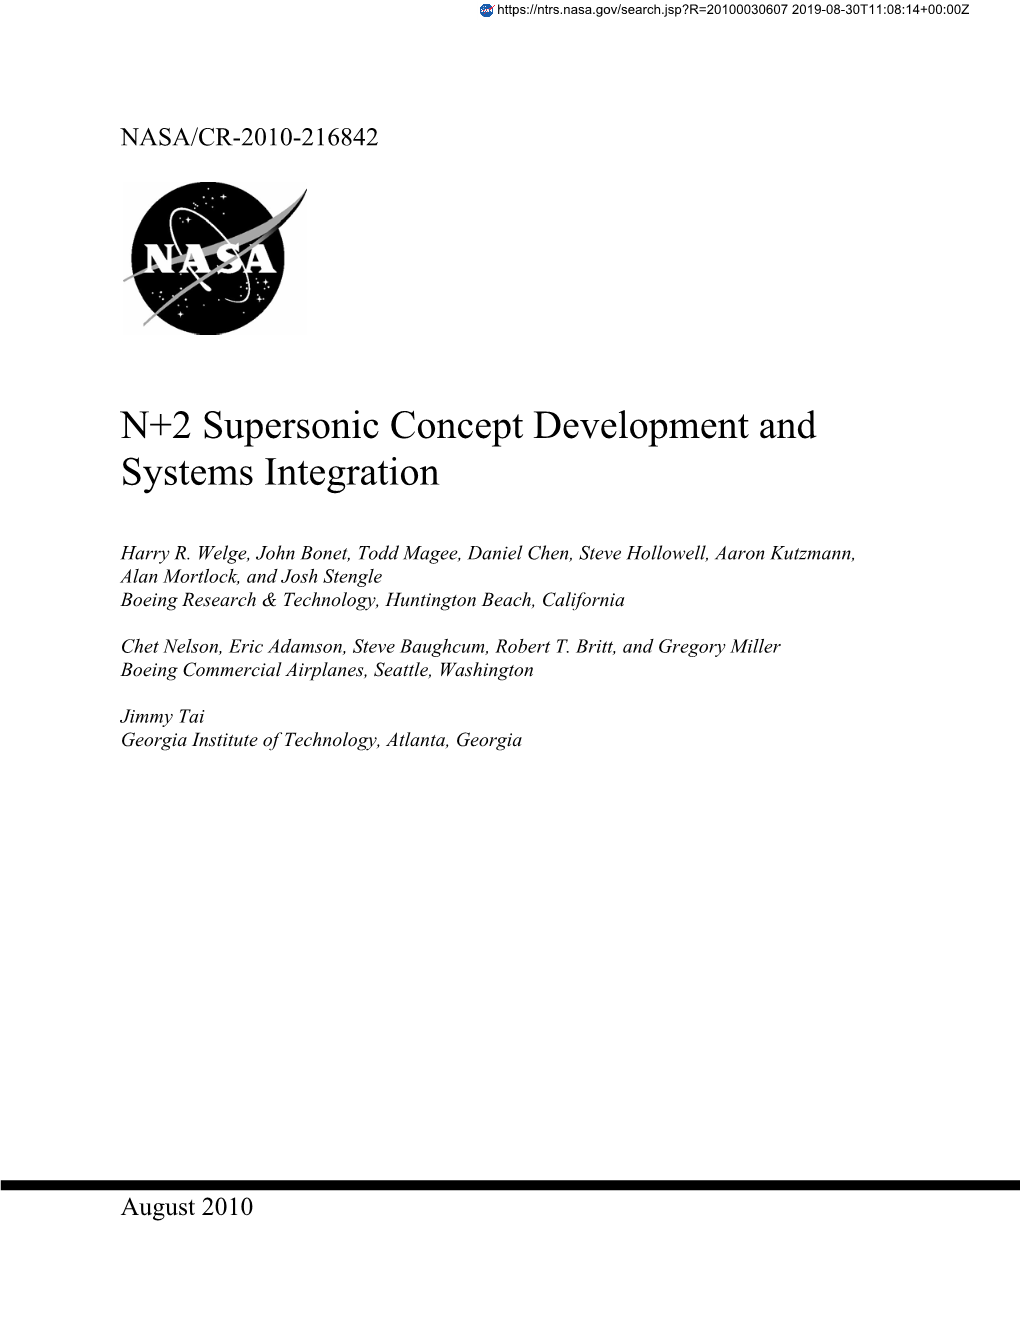 N+2 Supersonic Concept Development and Systems Integration